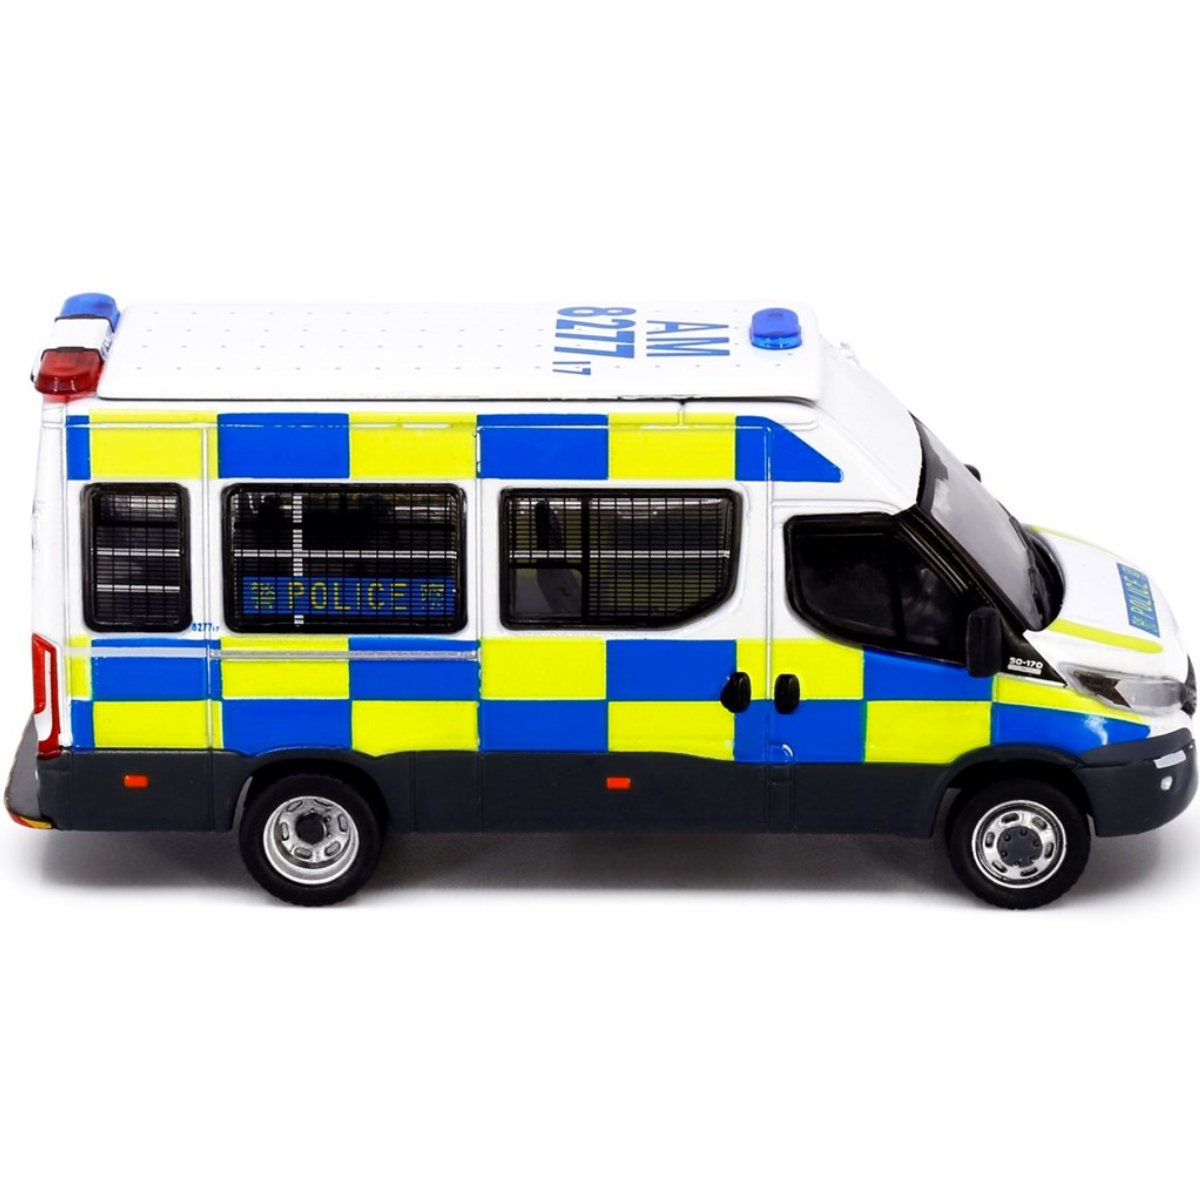 Tiny Models Iveco Daily Police Traffic Van AM8277 (1:76 Scale) - Phillips Hobbies